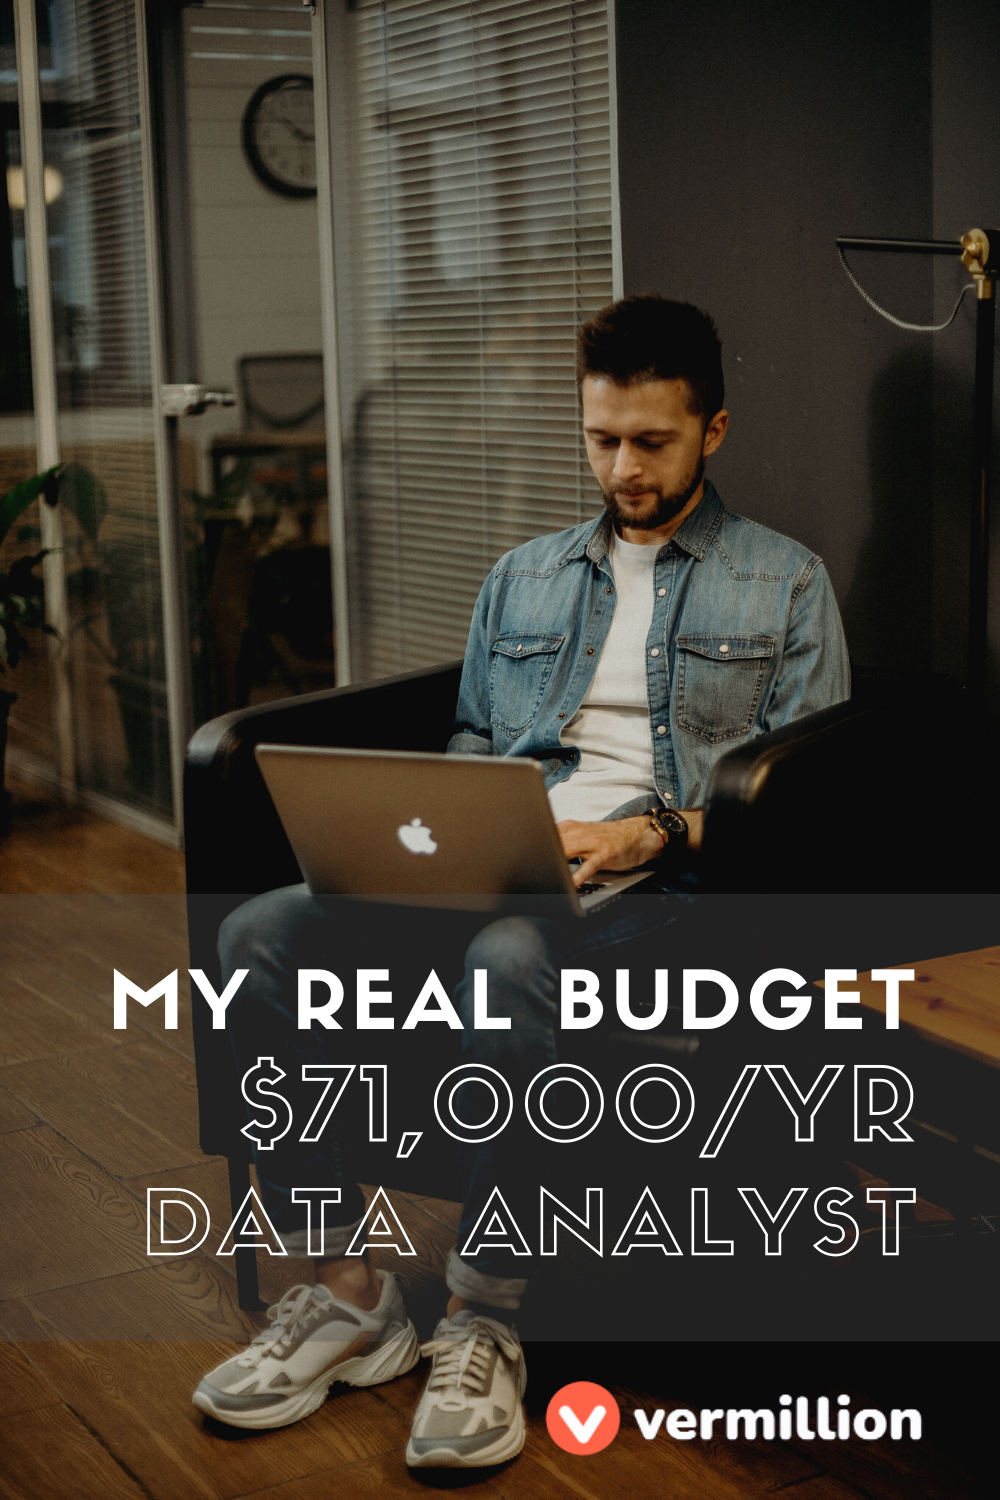 George makes good money as a data analyst - but how does his budget stack up?